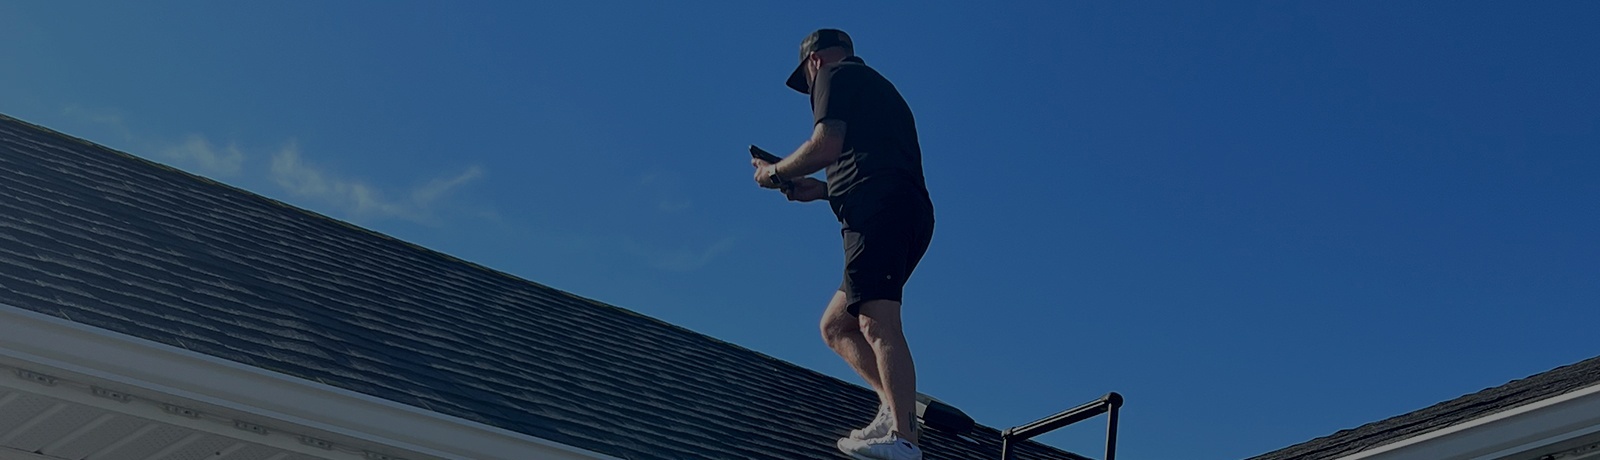 home inspections calgary